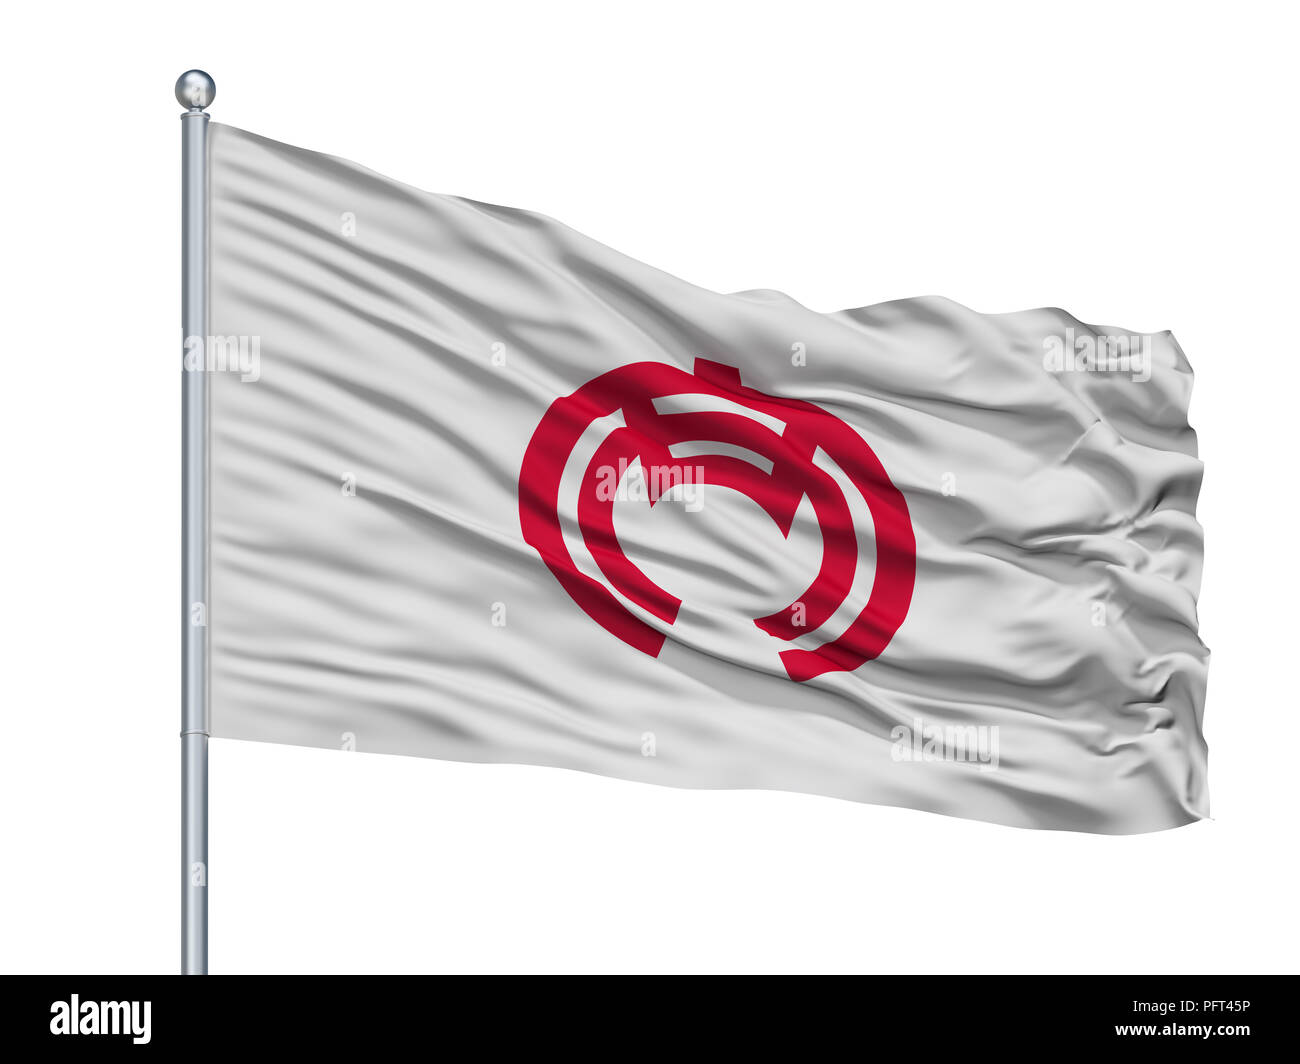 Anjo City Flag On Flagpole, Japan, Aichi Prefecture, Isolated On White Background Stock Photo